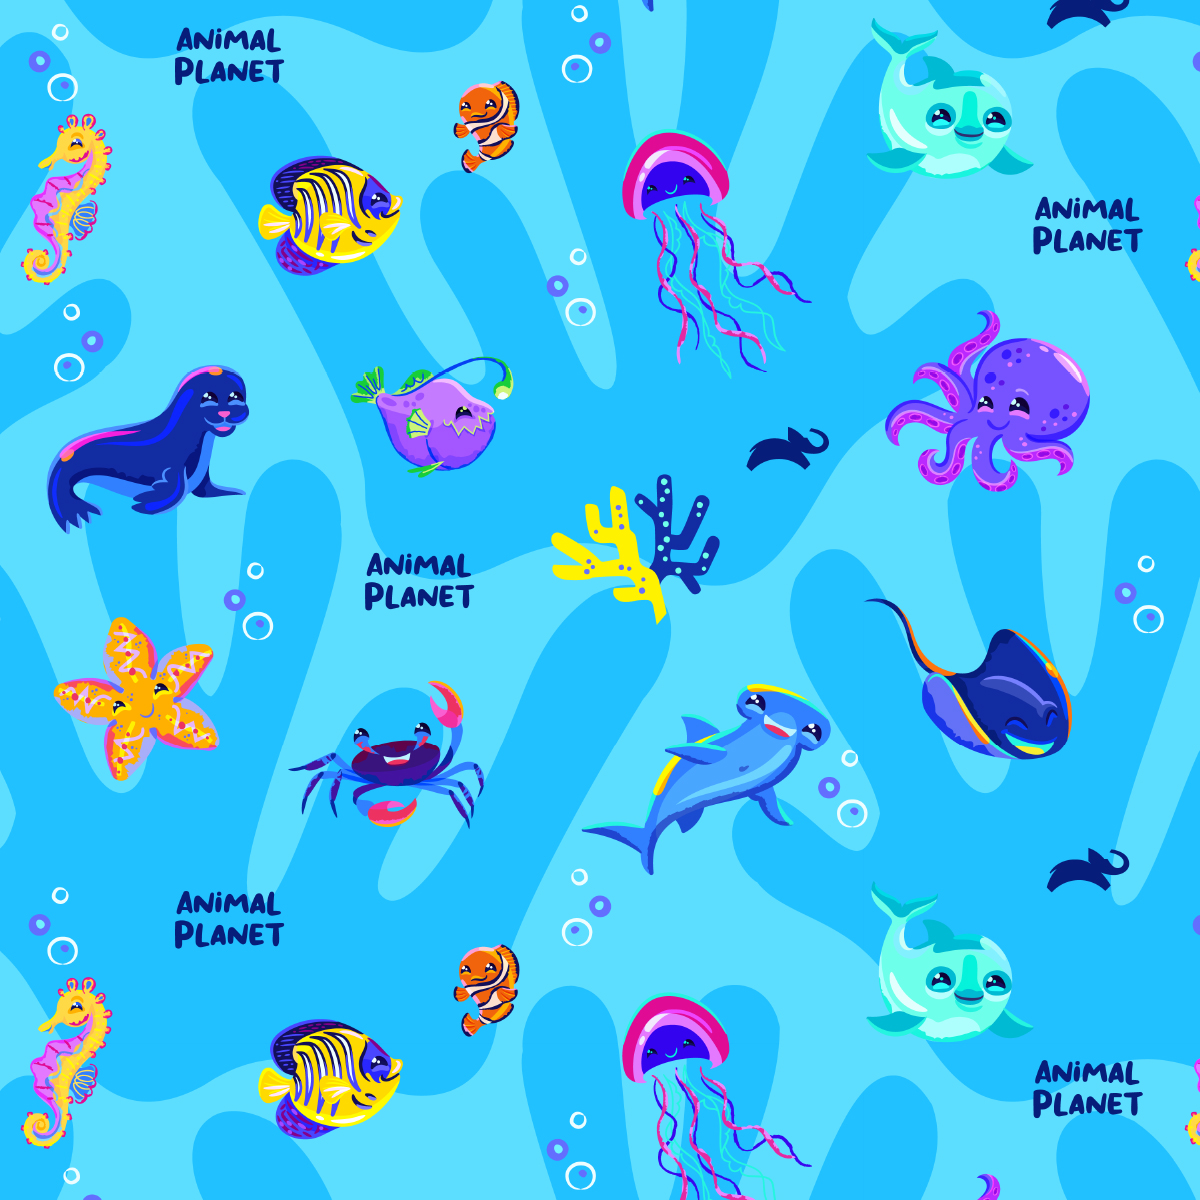 Another pattern from Under the Sea featuring character art of marine animals over light blue background.